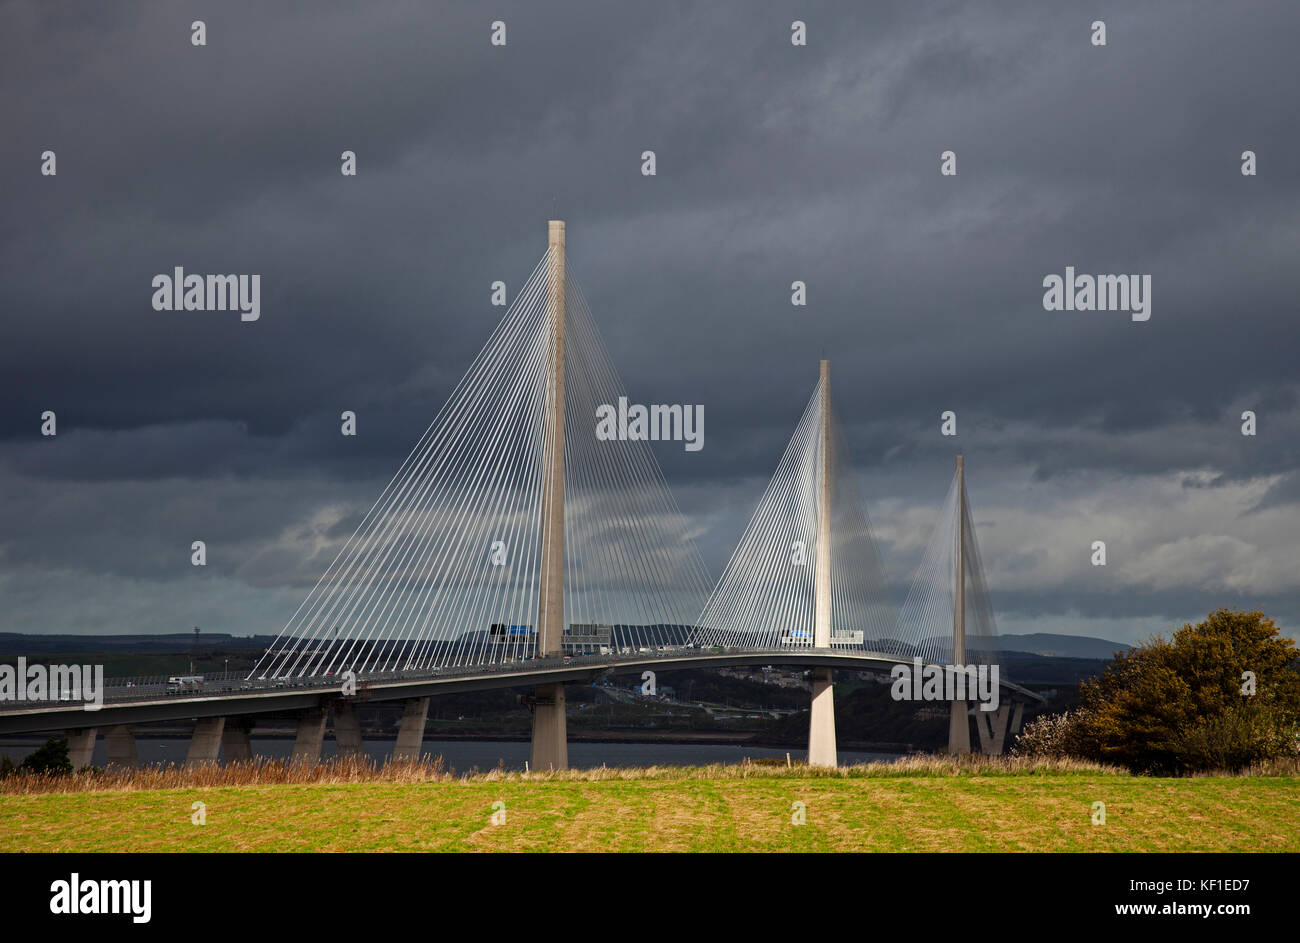 Edinburgh, South Queensferry, Scotland, UK. 25th Oct, 2017. UK Weather. Moody skies with wind keeping the clouds moving and sunshine around the new Queensferry Crossing. Stock Photo